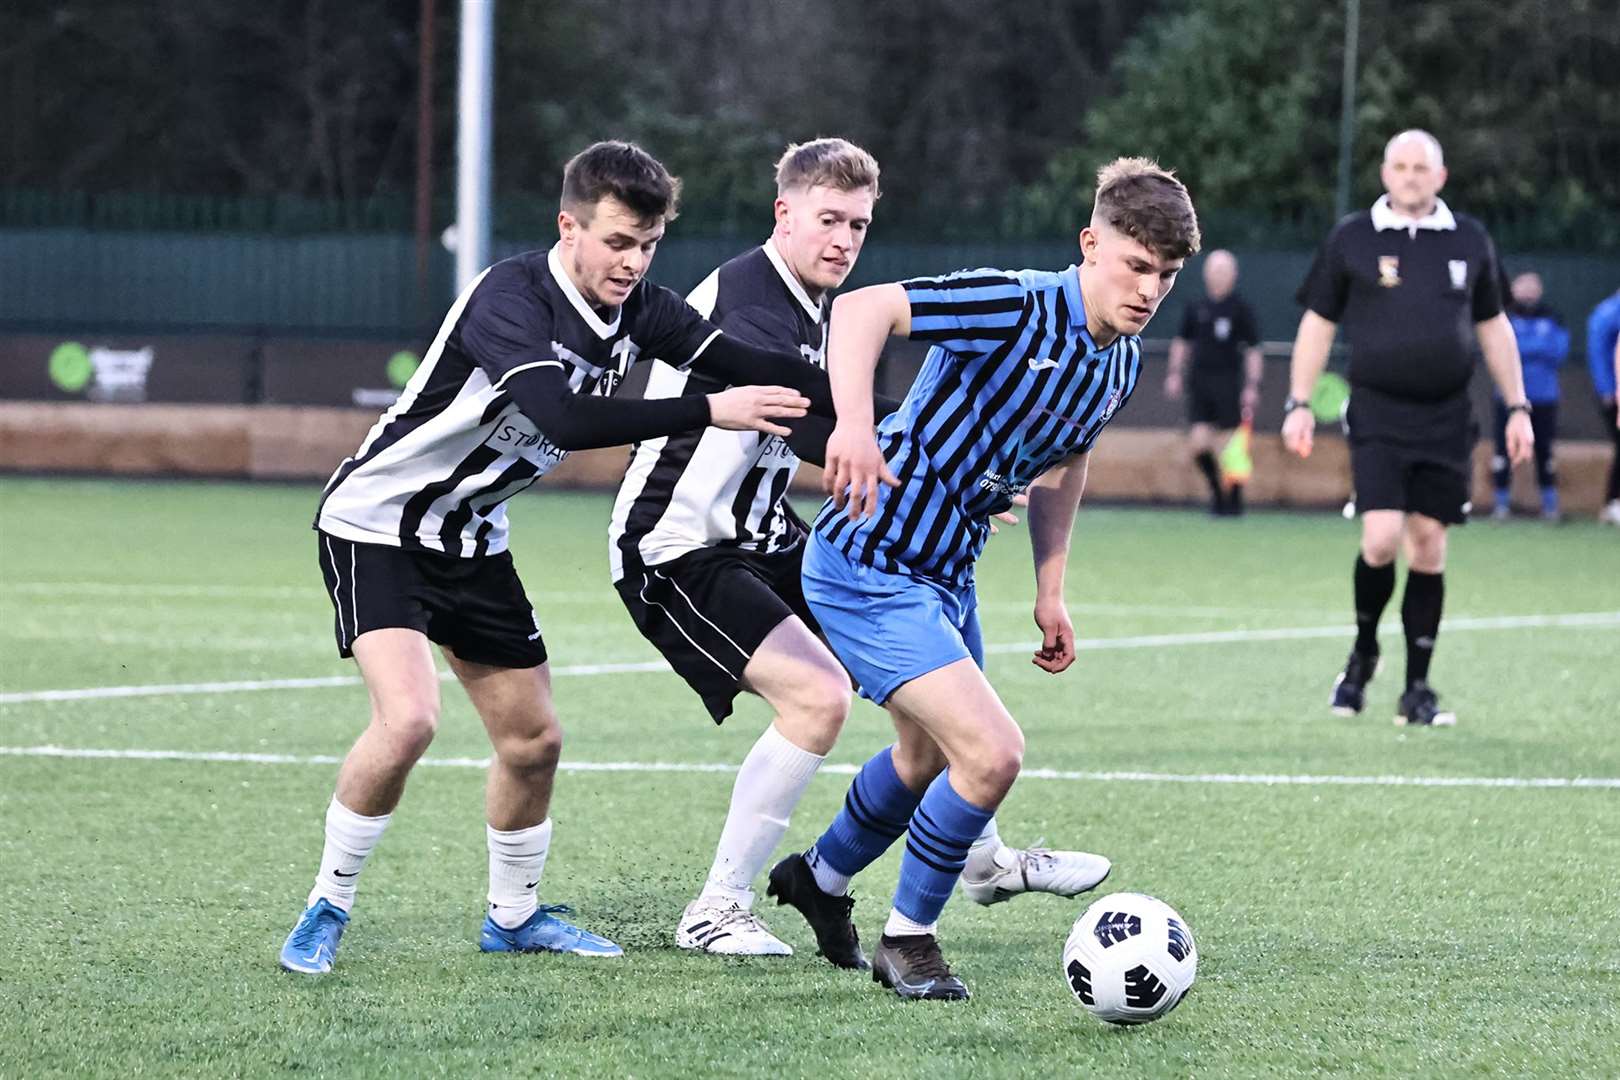 CS Morley Cup final action between Watlington SSC and Tacolneston at the Football Development Centre. Picture: Steve Wood Photography (63451630)